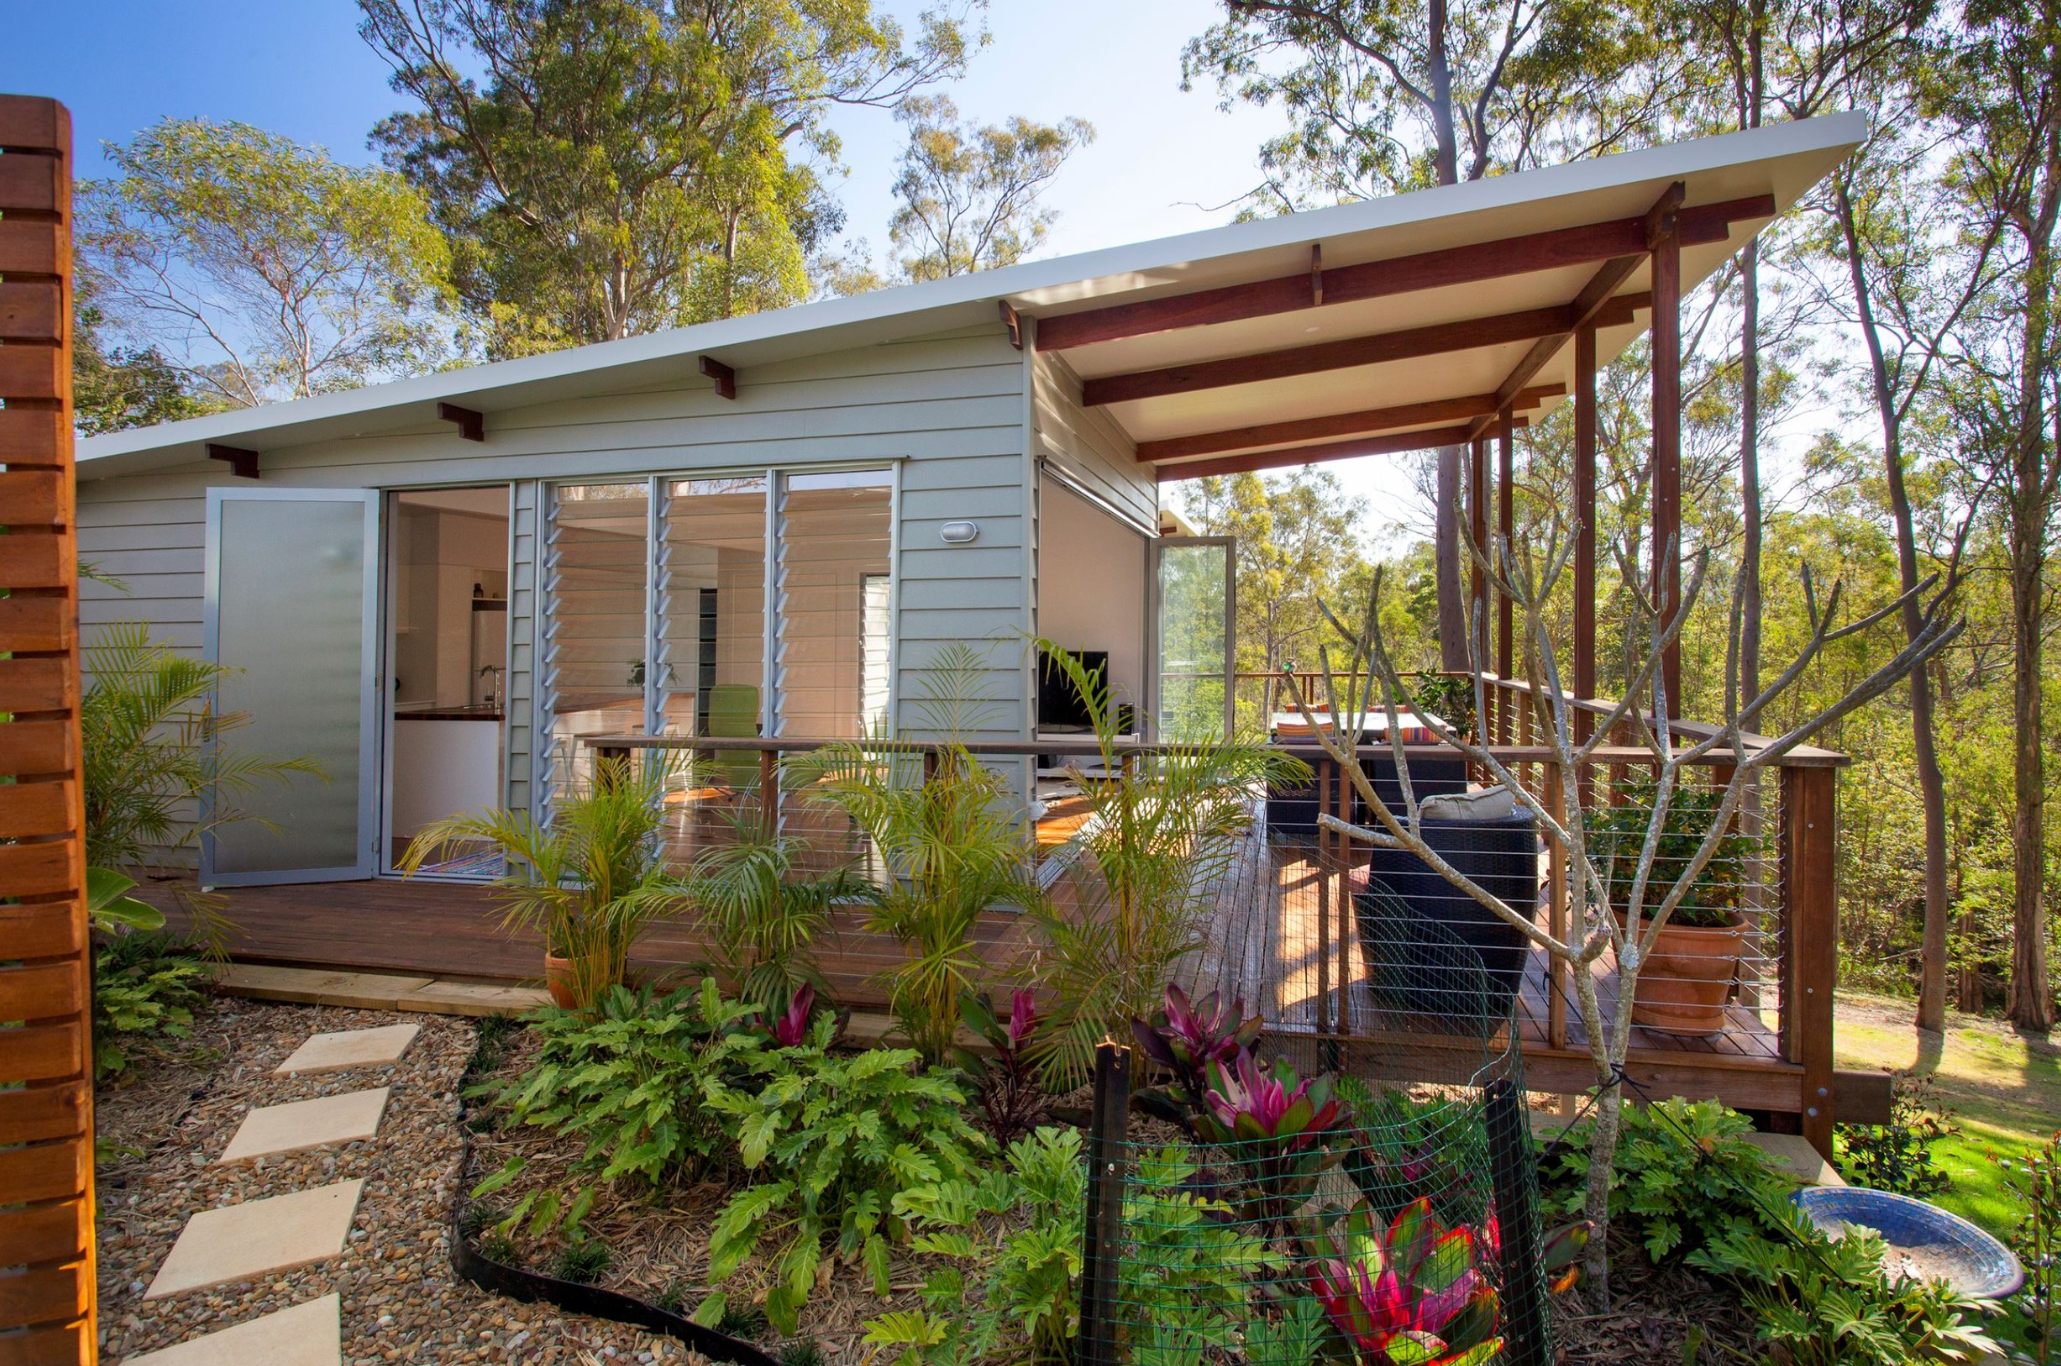 Modern Granny Flats: The Solution for Your Family's Needs?